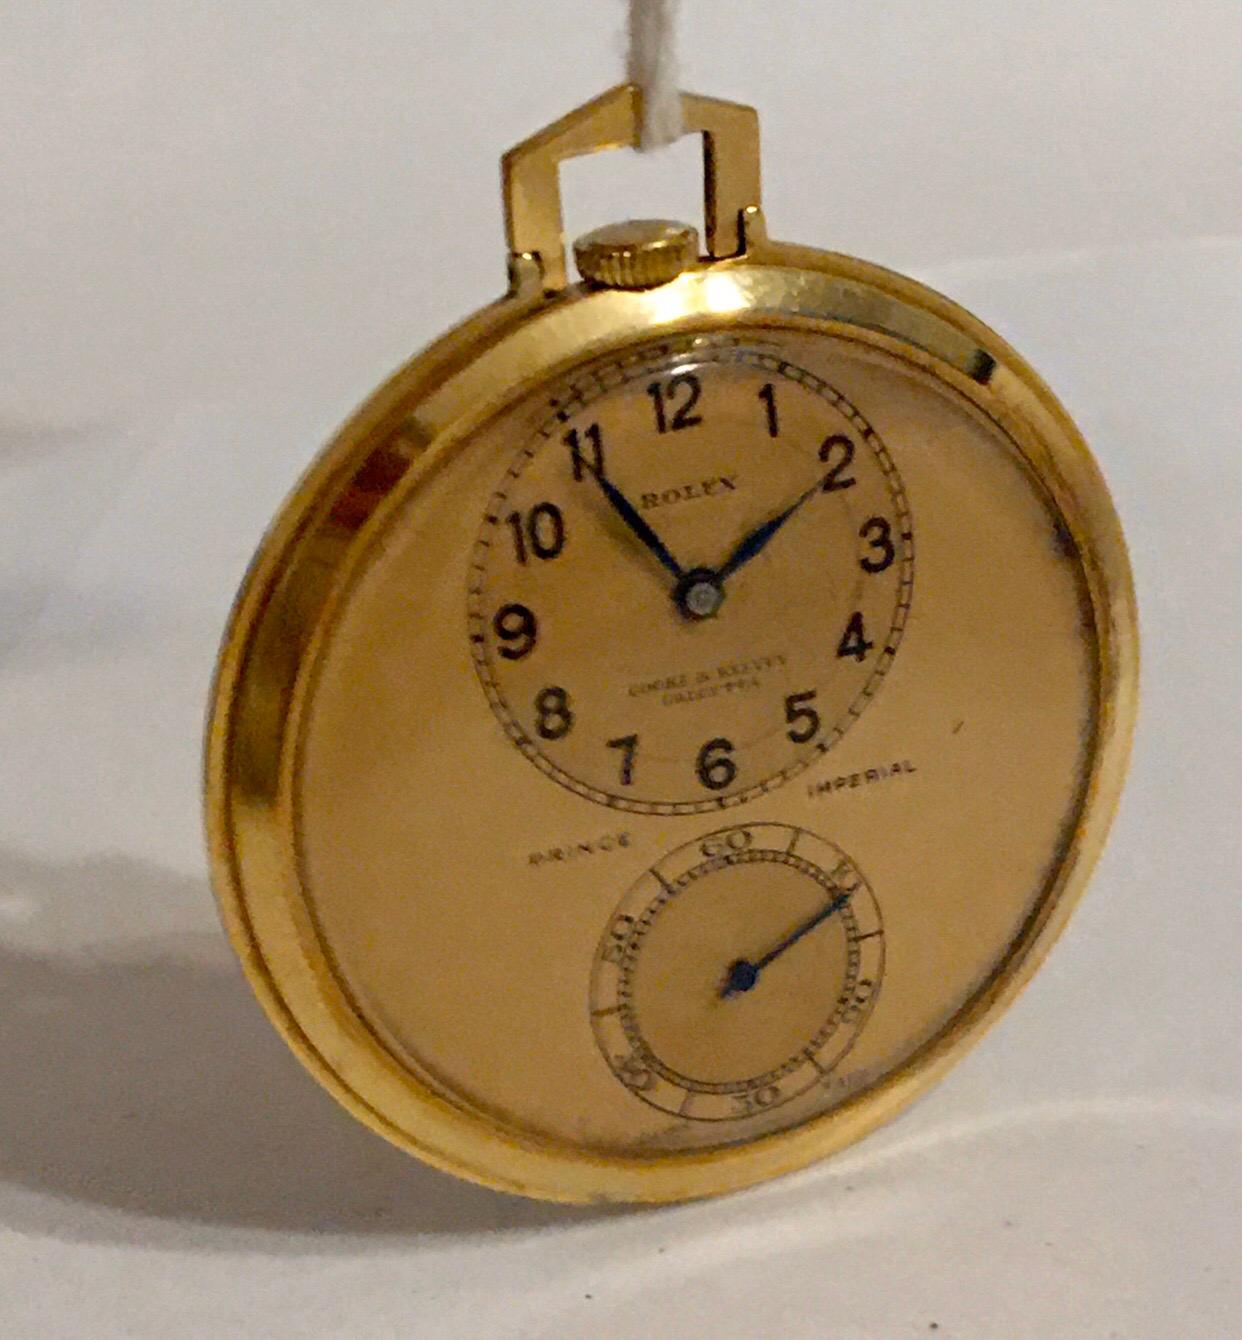 Rare 18k Gold Rolex Observatory Prince Imperial Dress Pocket Watch, circa 1950s For Sale 5